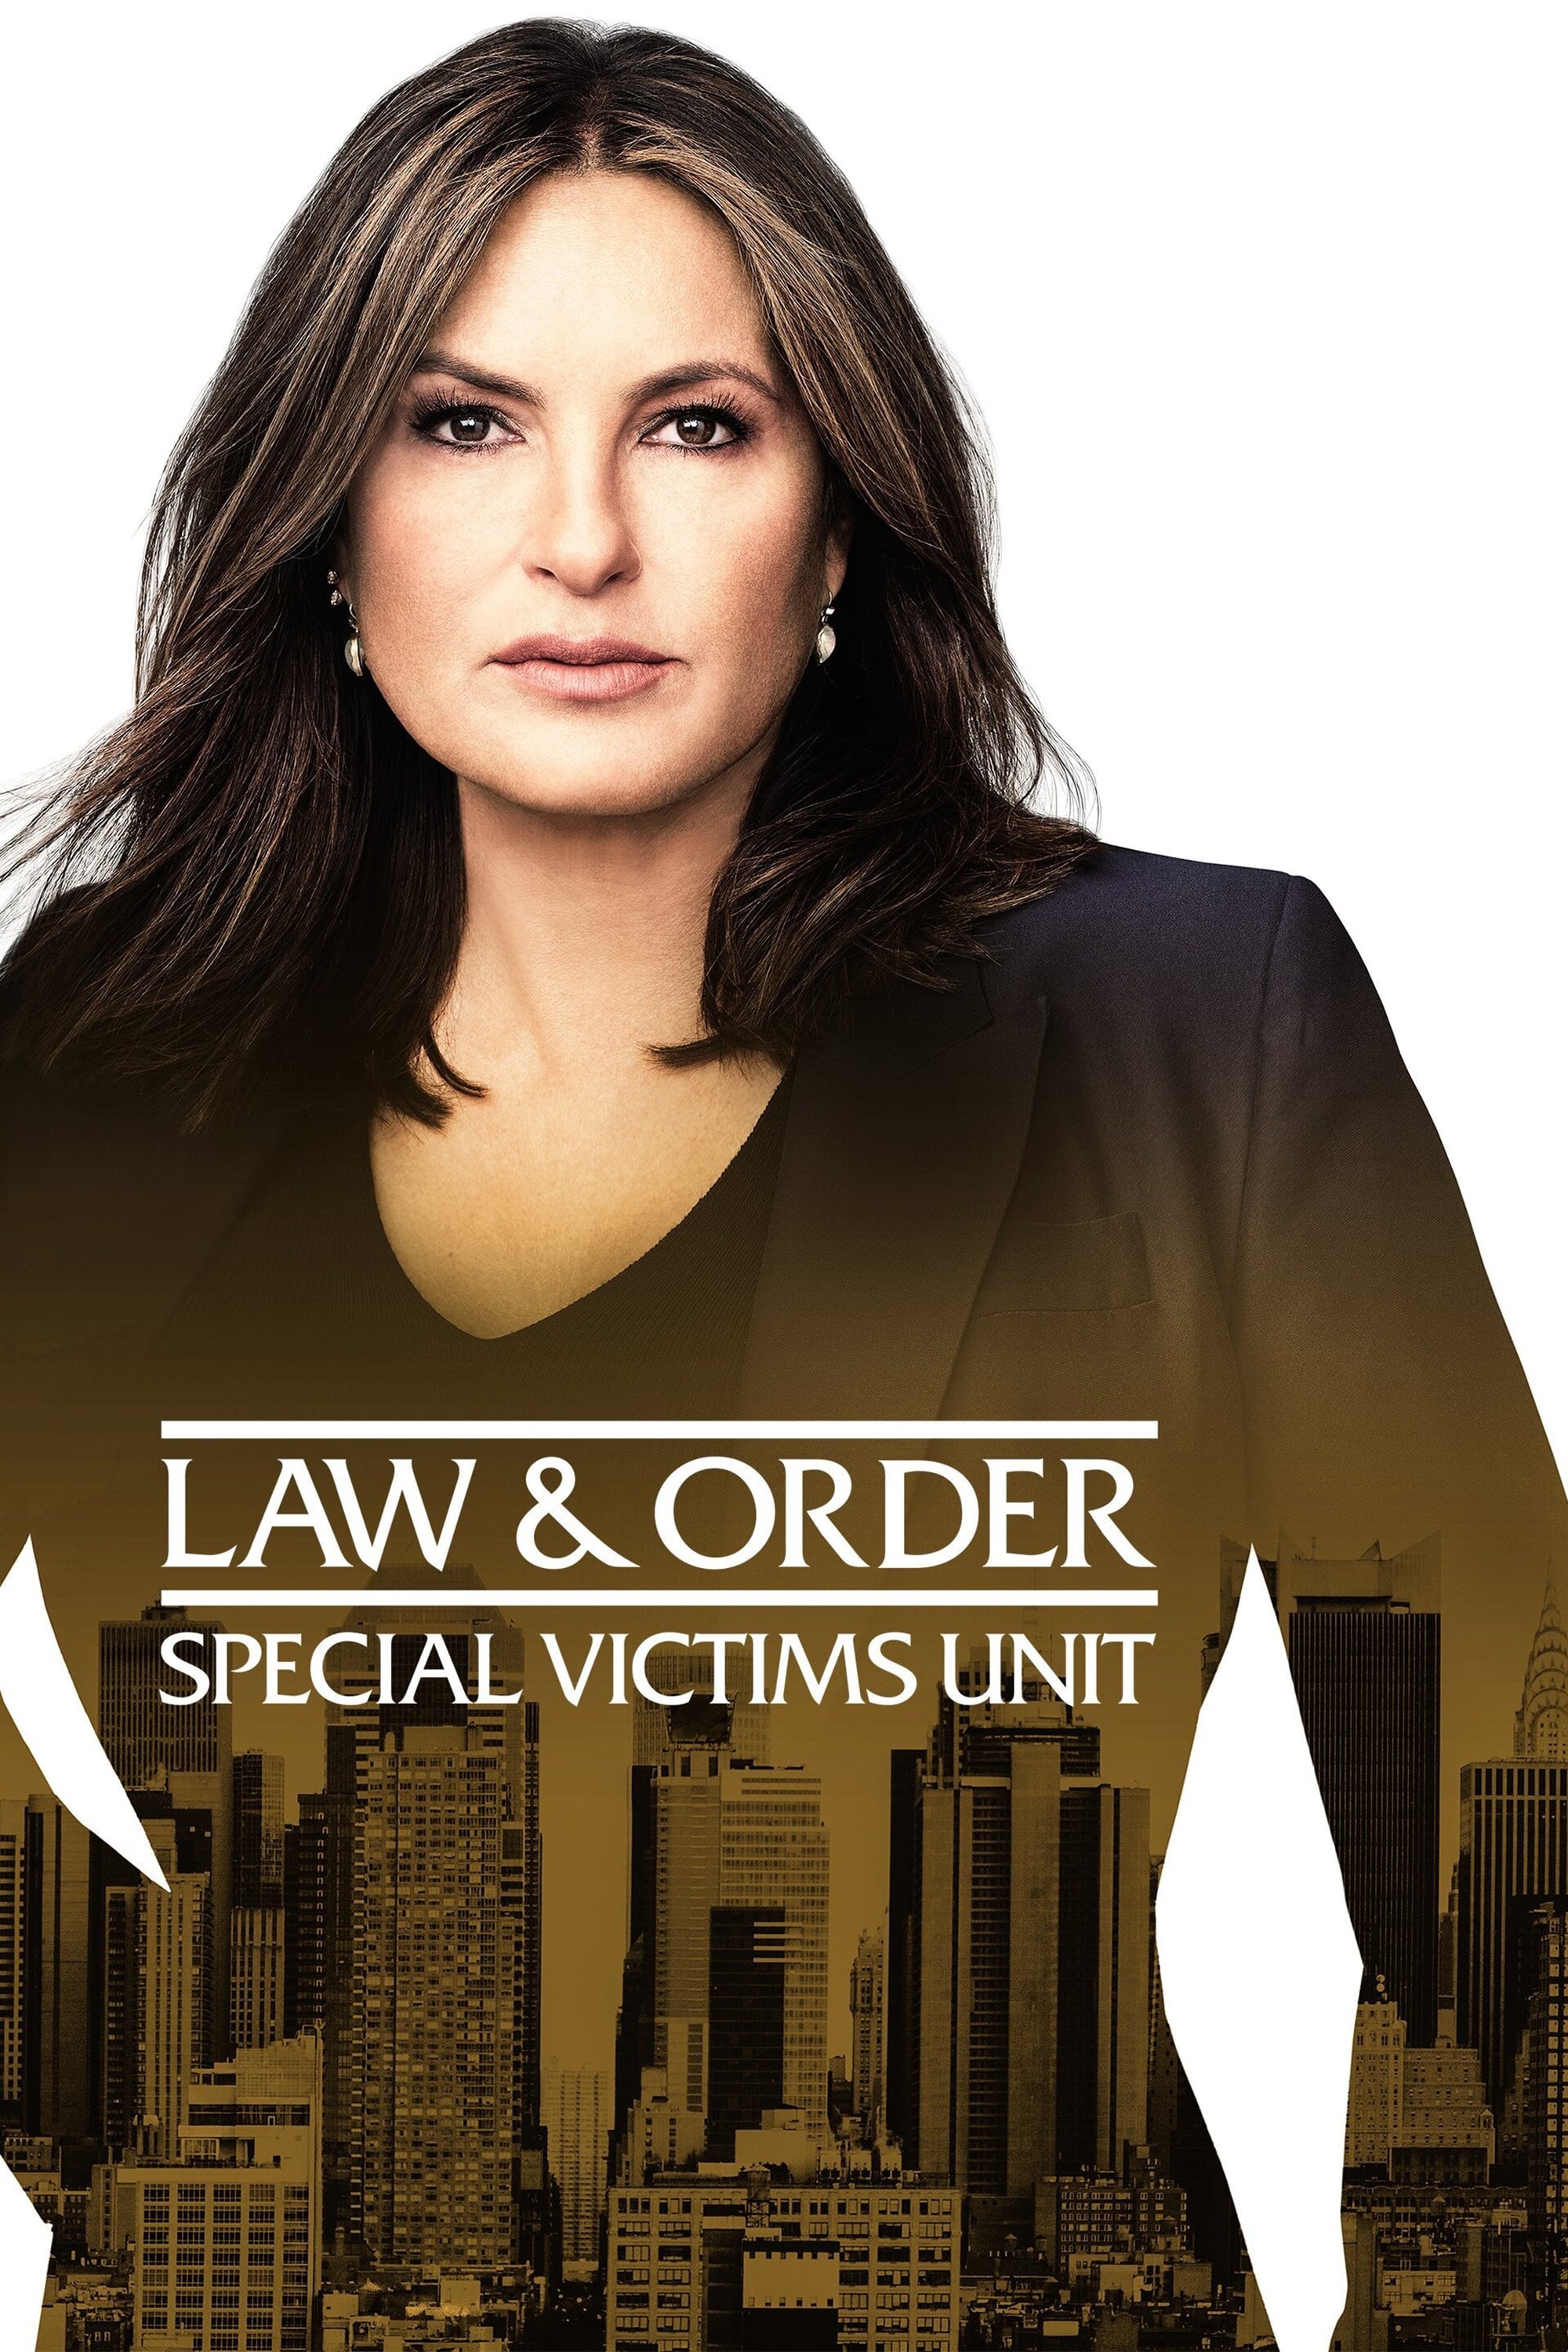 Law & Order: Special Victims Unit TV Shows About Assistant District Attorney